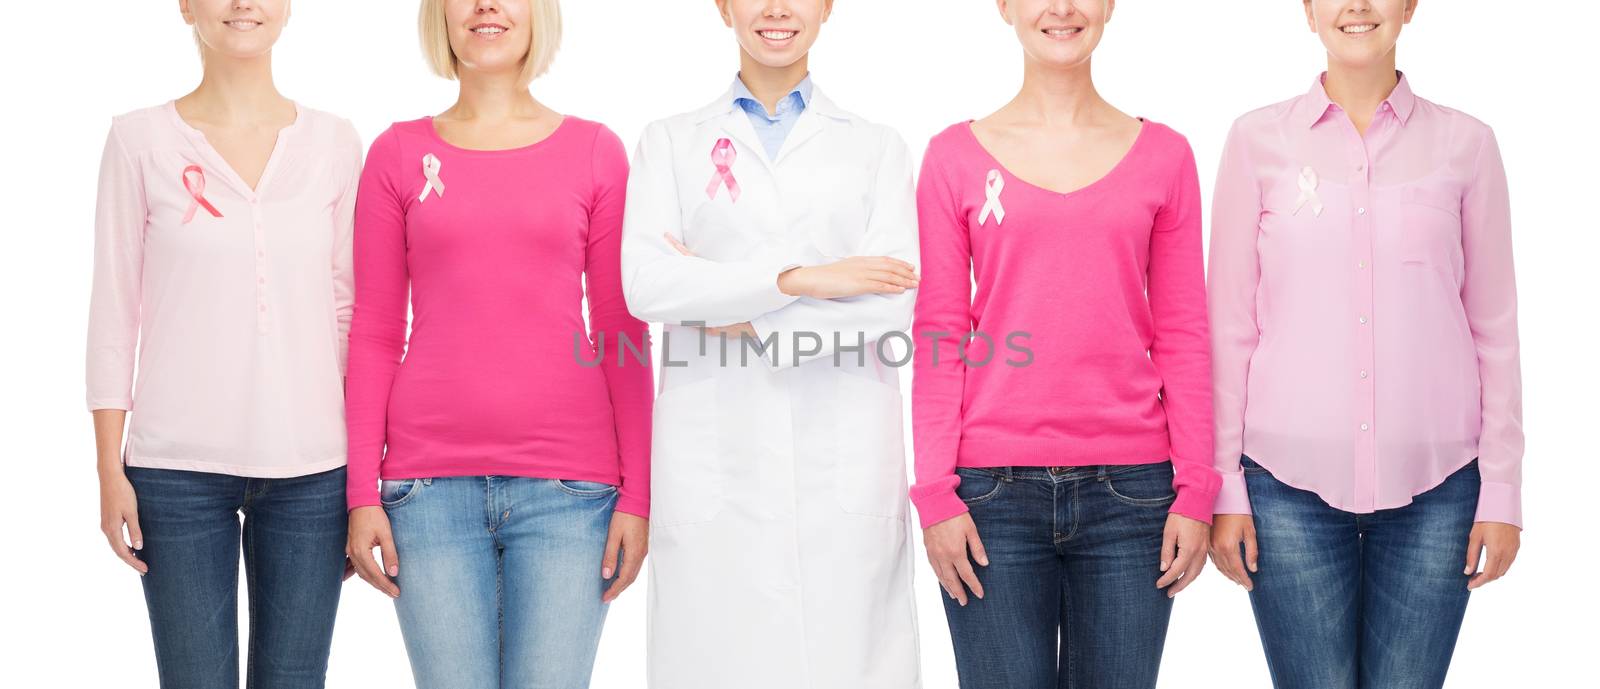 close up of women with cancer awareness ribbons by dolgachov